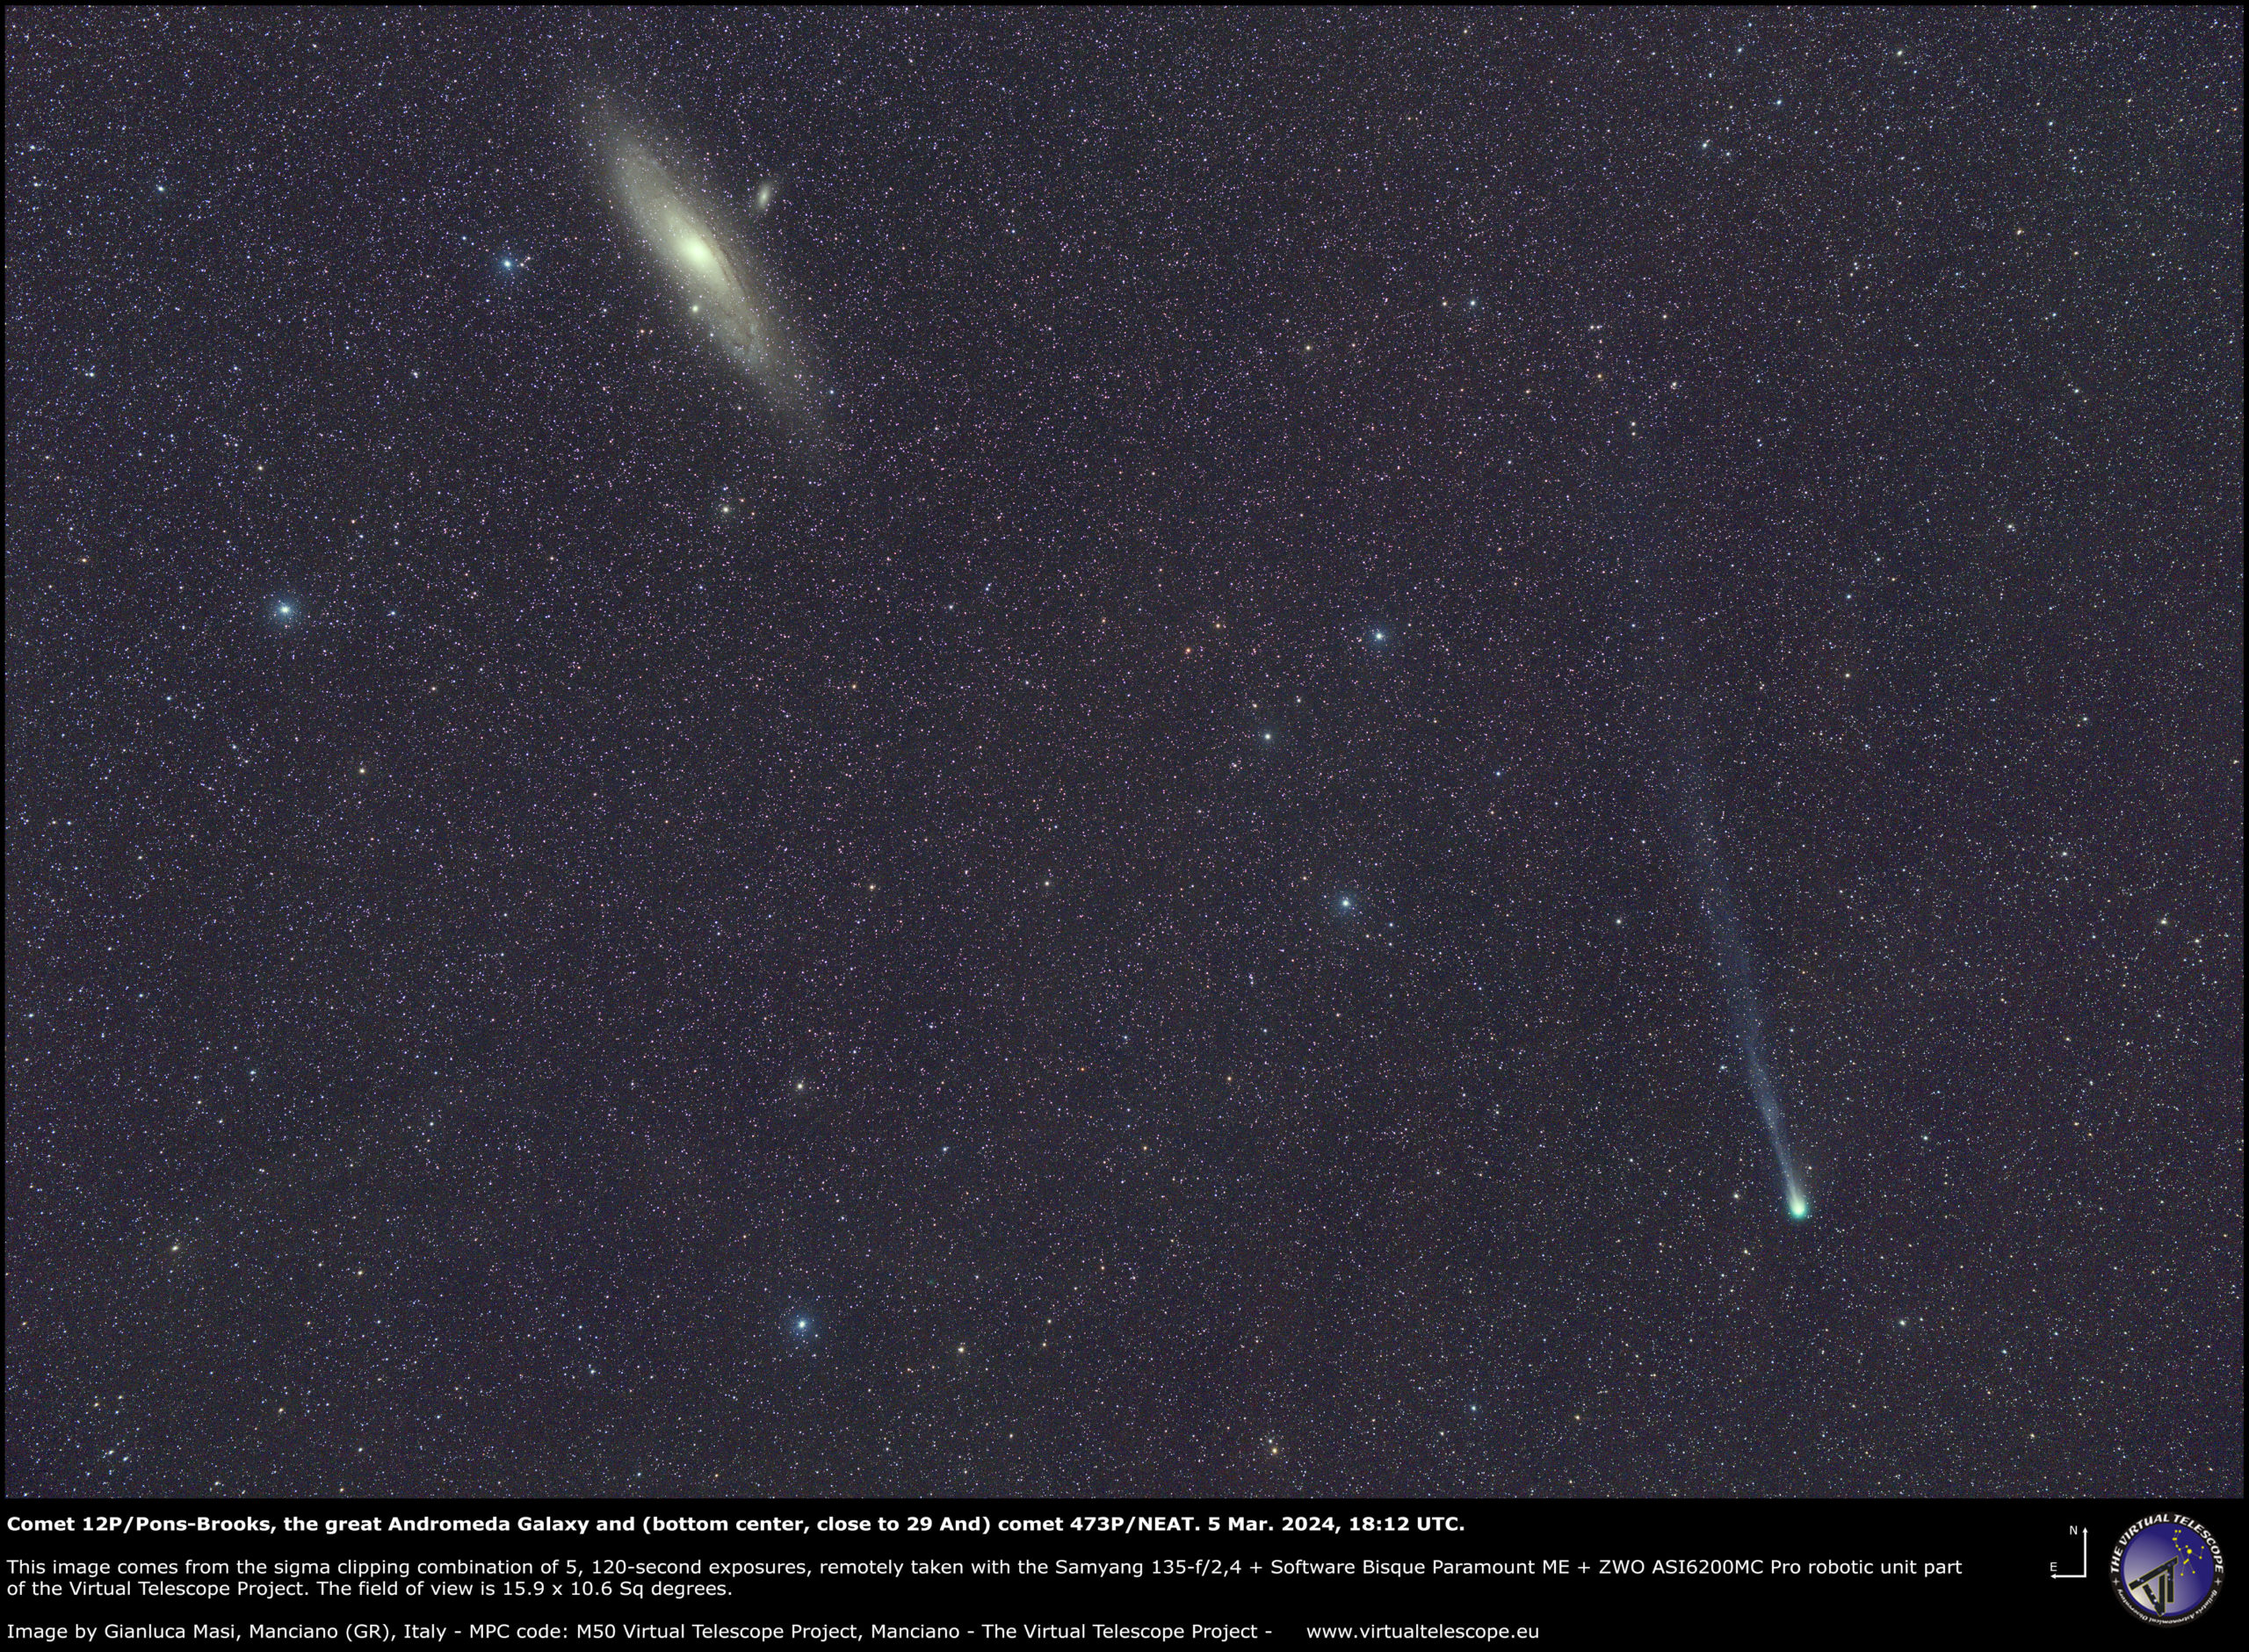 Comet 12P/Pons-Brooks and the great Andromeda Galaxy. 5 Mar. 2024.